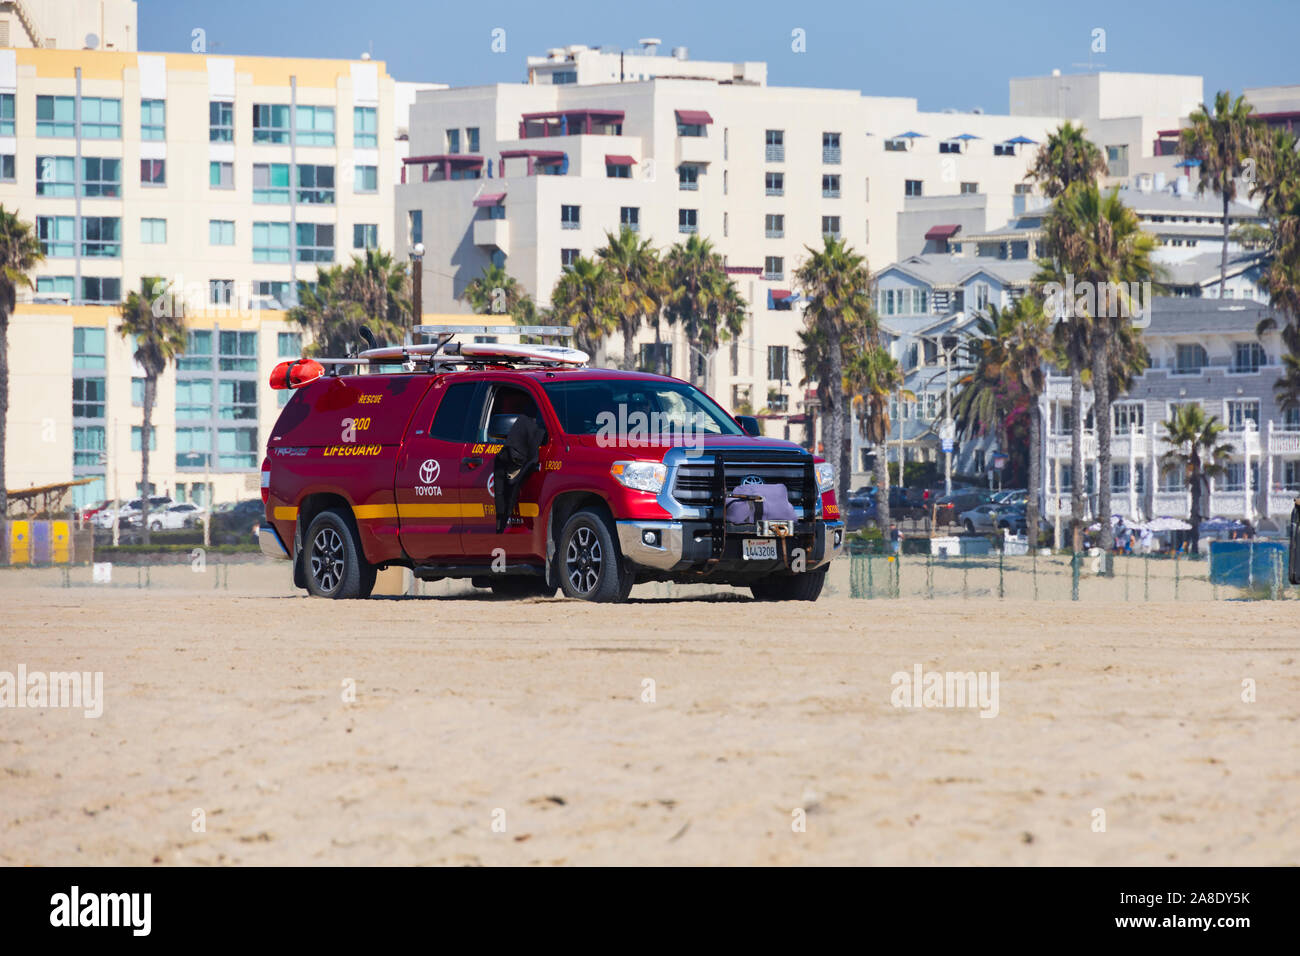 Lifeguards Toyota rescue vehicle patrolling the beach, Santa Monica, Los Angeles County, California, United States of America Stock Photo